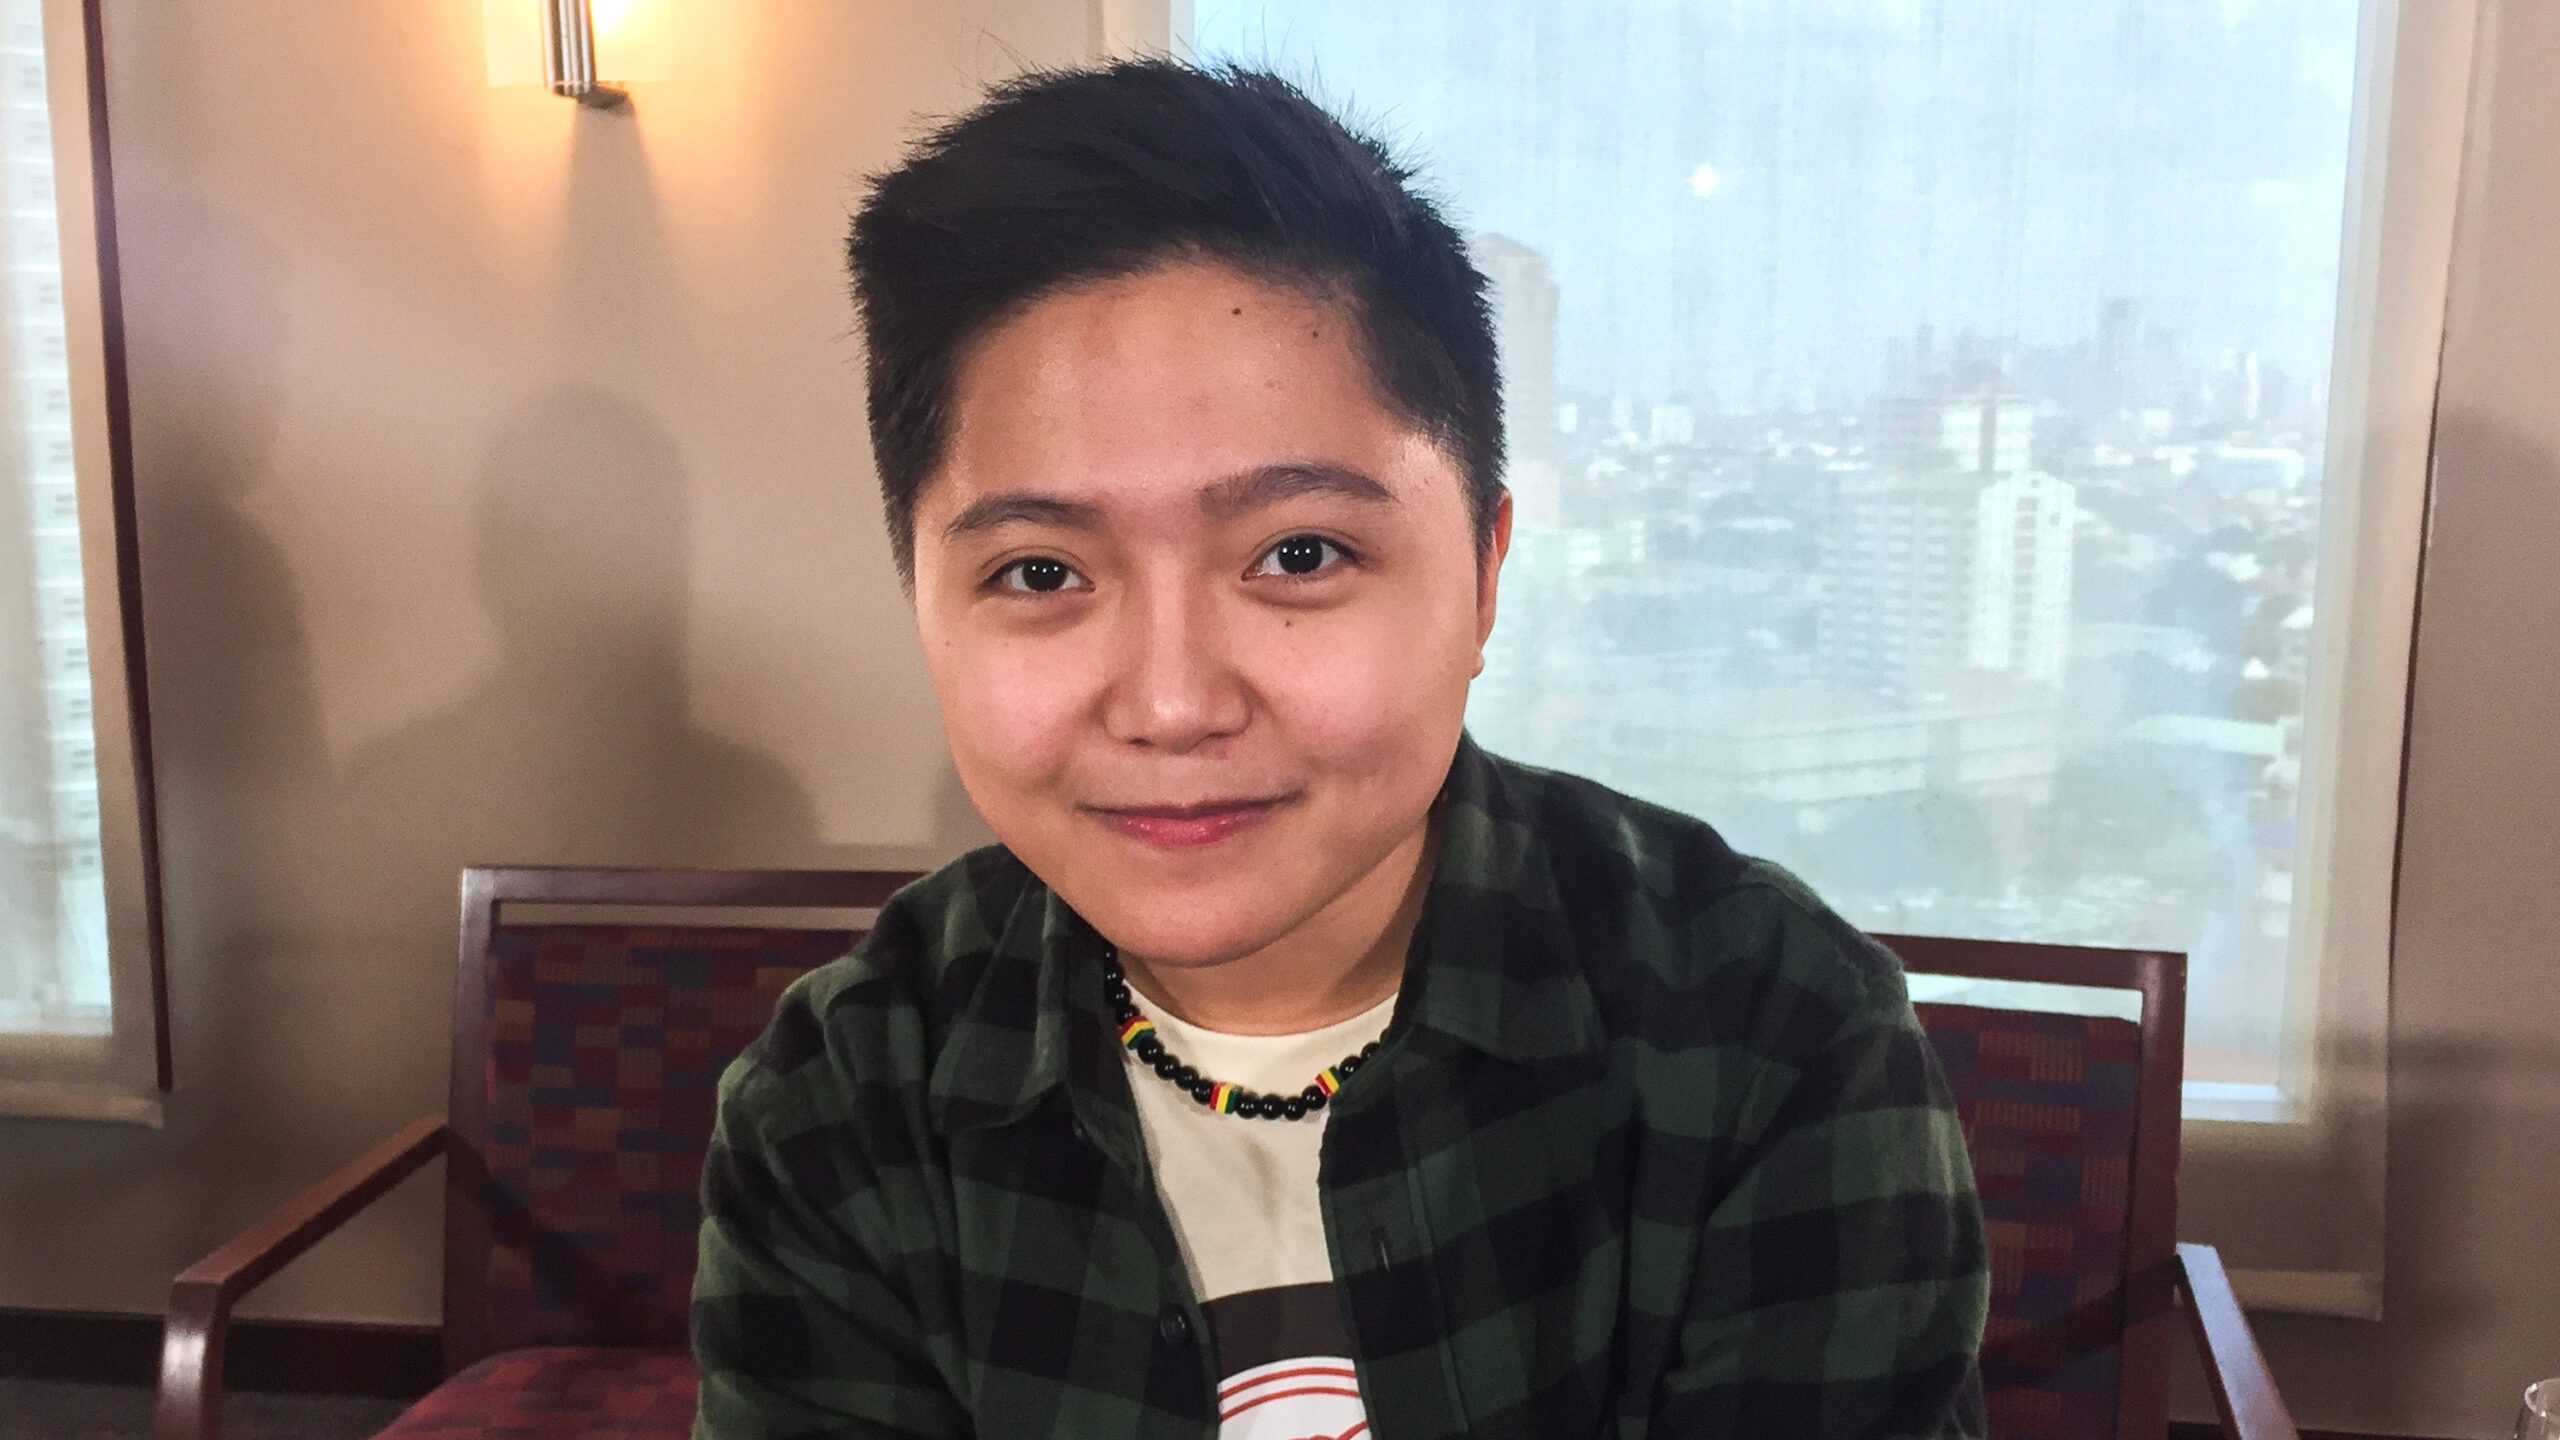 Charice confirms parting of ways with management